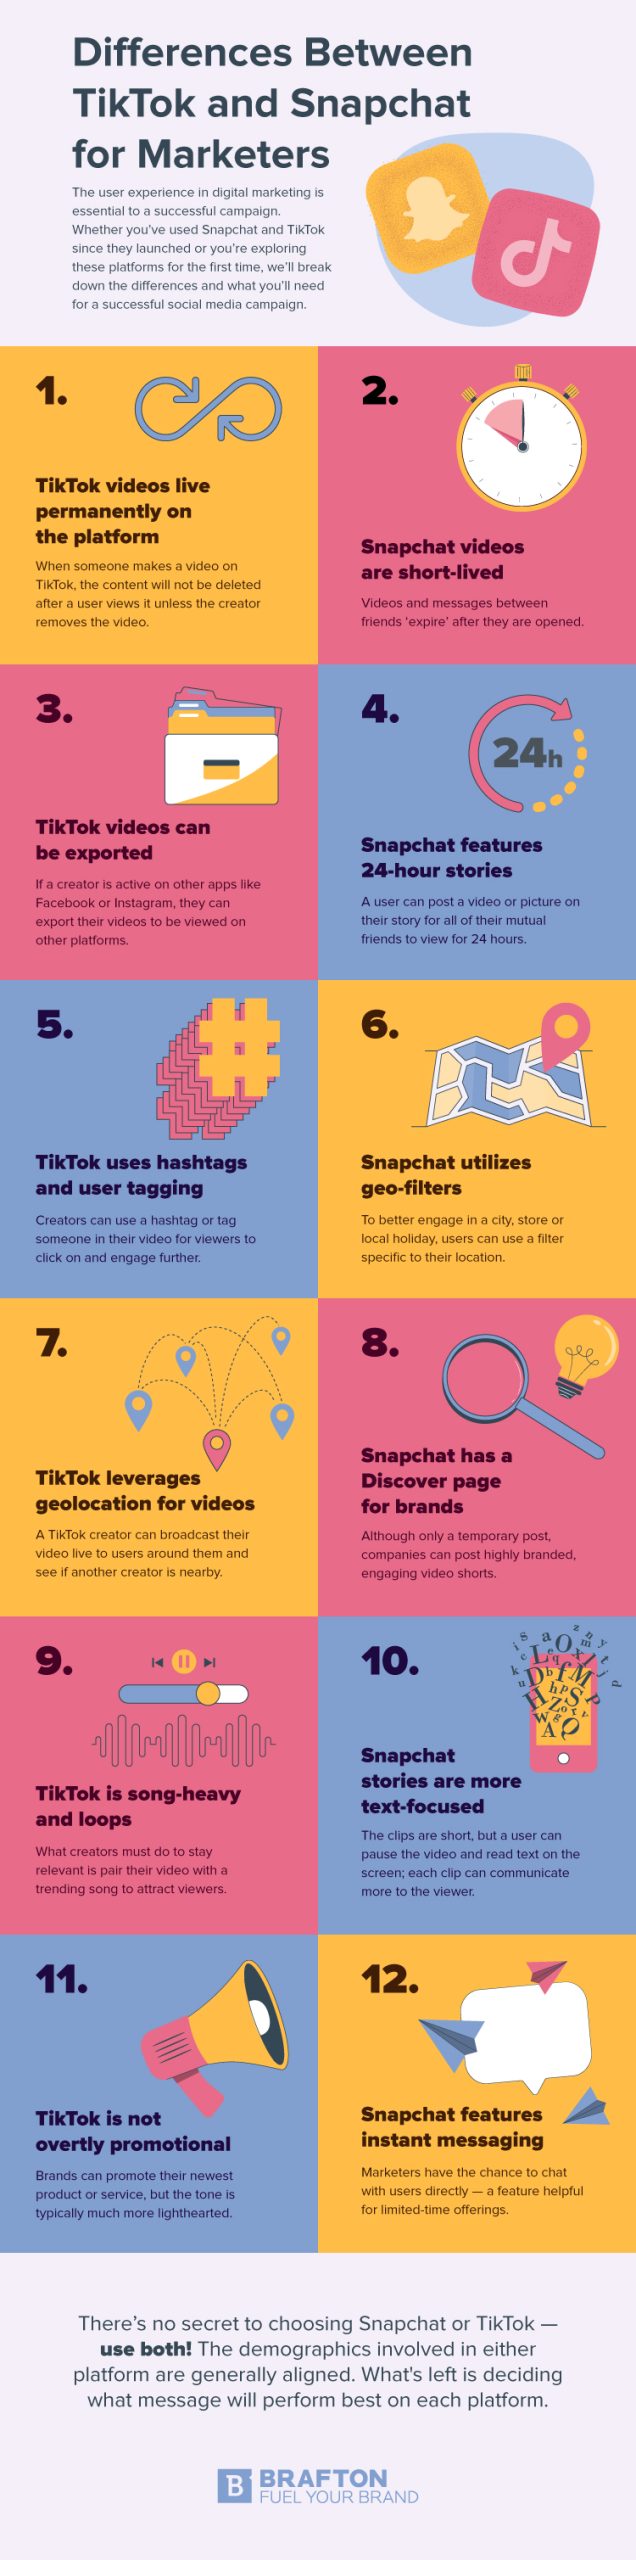 Differences between TikTok and SnapChat for Marketers infographic